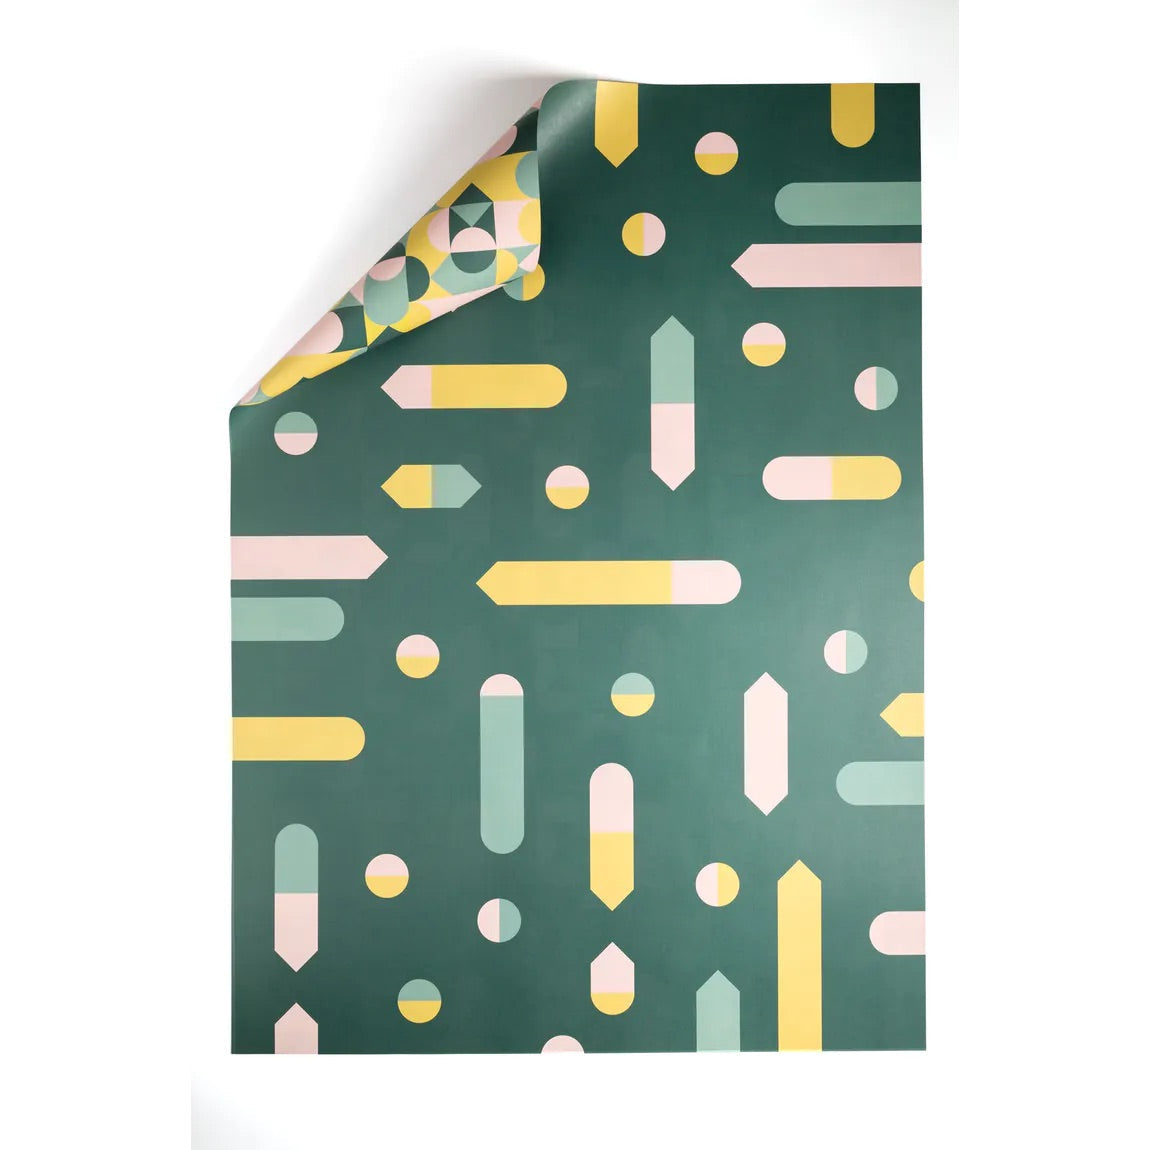 Recycled Double Sided Wrapping Paper - For Eco-friendly and versatile creative gift presentation